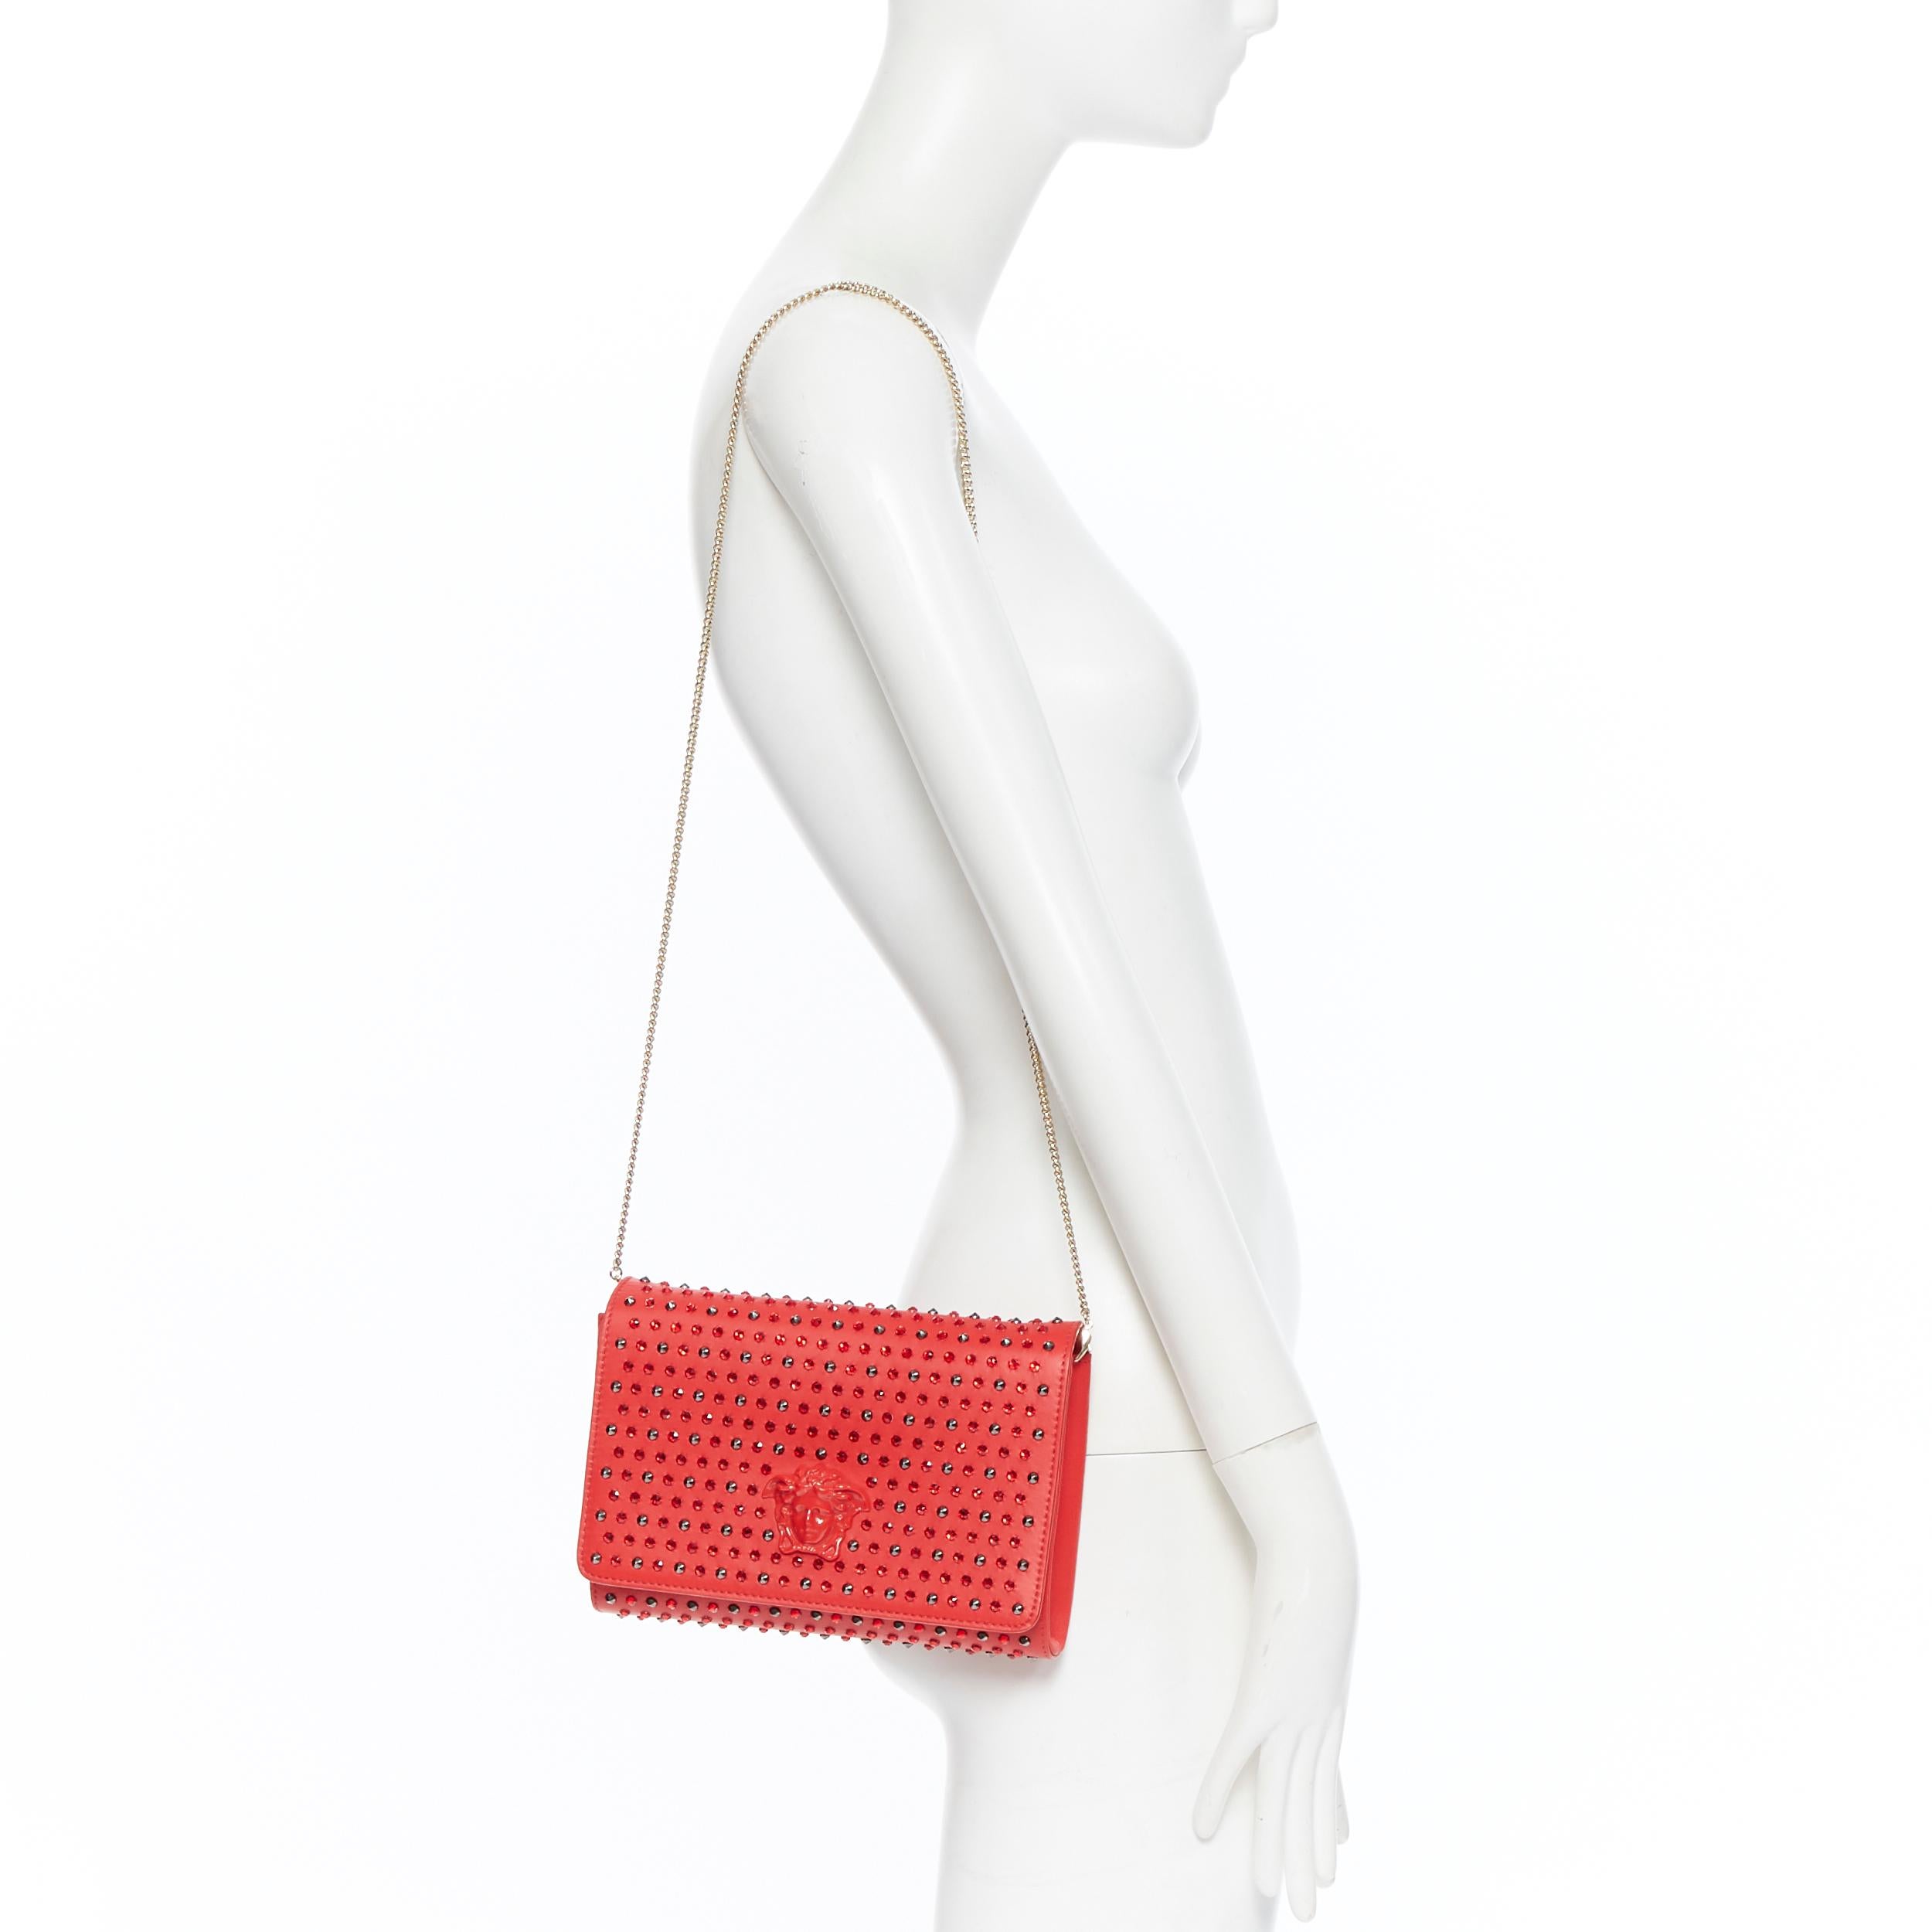 new VERSACE gold leather tonal Medusa head crystal strass stud flap clutch bag 
Brand: Versace
Designer: Donatella Versace
Model Name / Style: Flap clutch
Material: Leather
Color: Red
Pattern: Solid
Closure: Magnetic
Lining material: Canvas
Extra